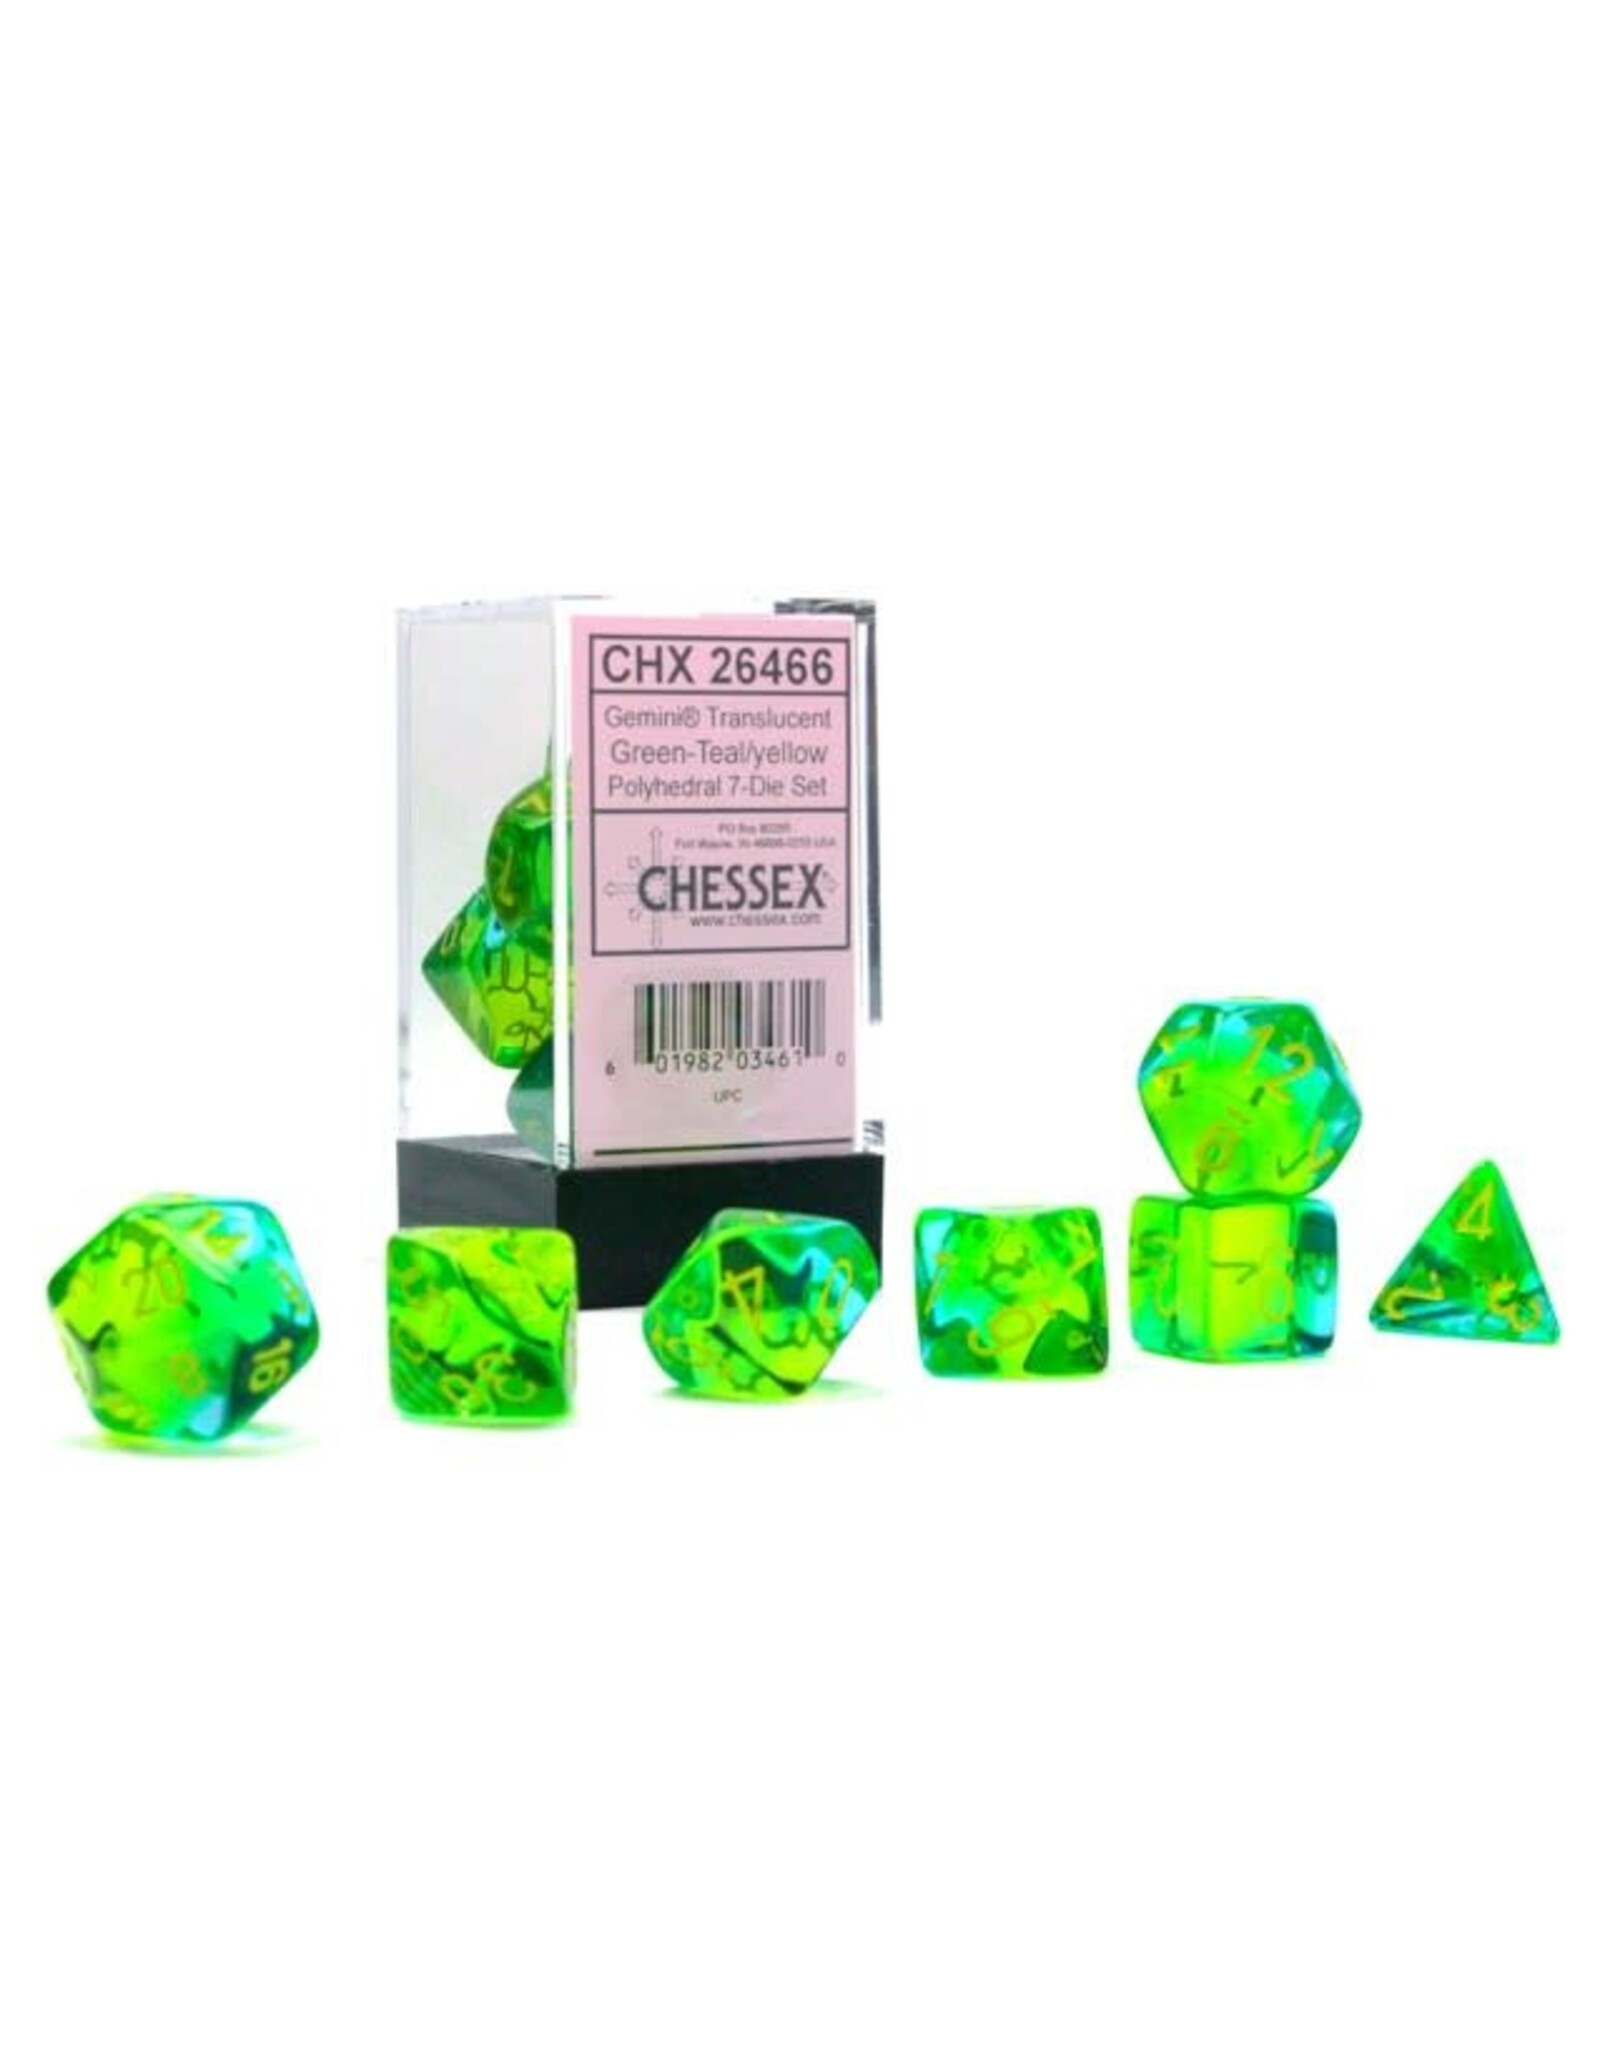 Chessex Green-Teal/yellow Gemini Poly 7 Dice Set